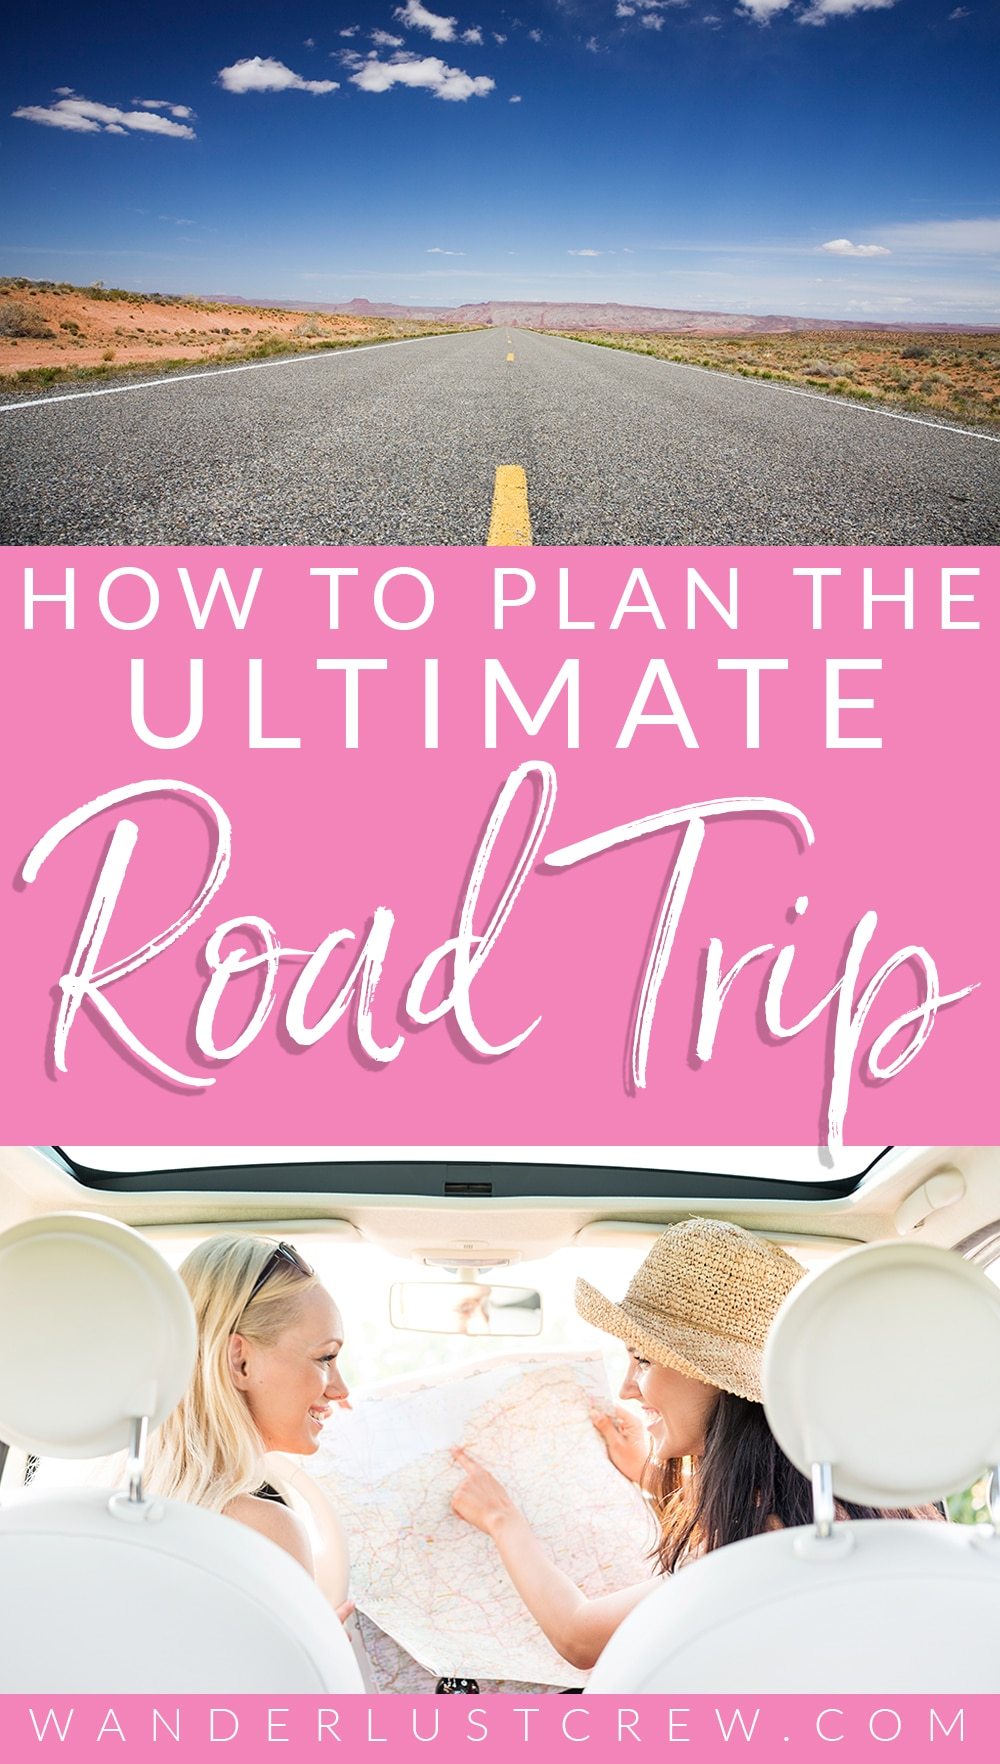 How to Plan the Ultimate Road Trip